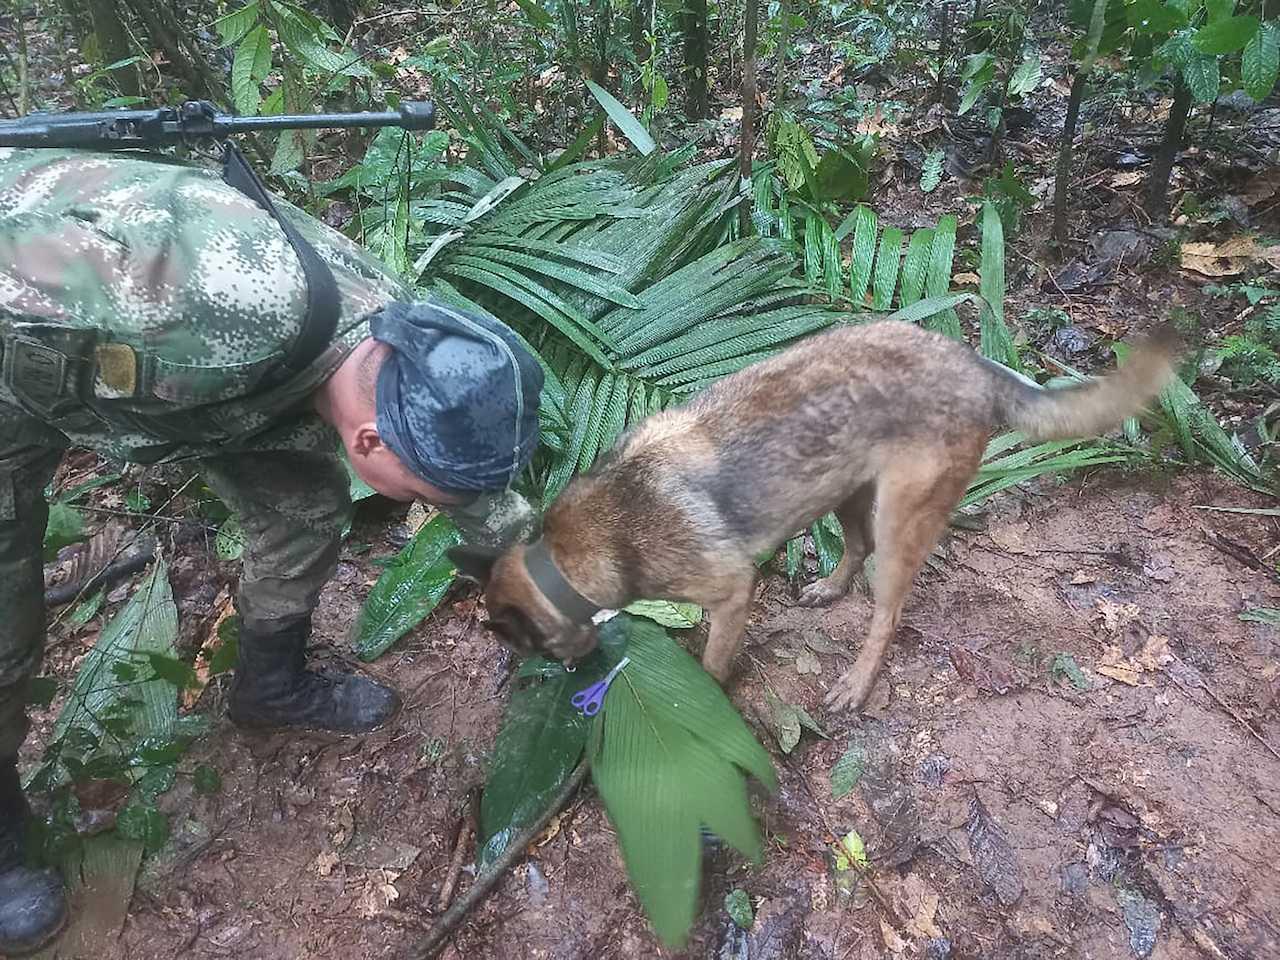 A soldier and a dog take part in a search operation for child survivors from a Cessna 206 plane that crashed in the jungle more than two weeks ago, in Caqueta, Colombia, May 17. Photo: Reuters